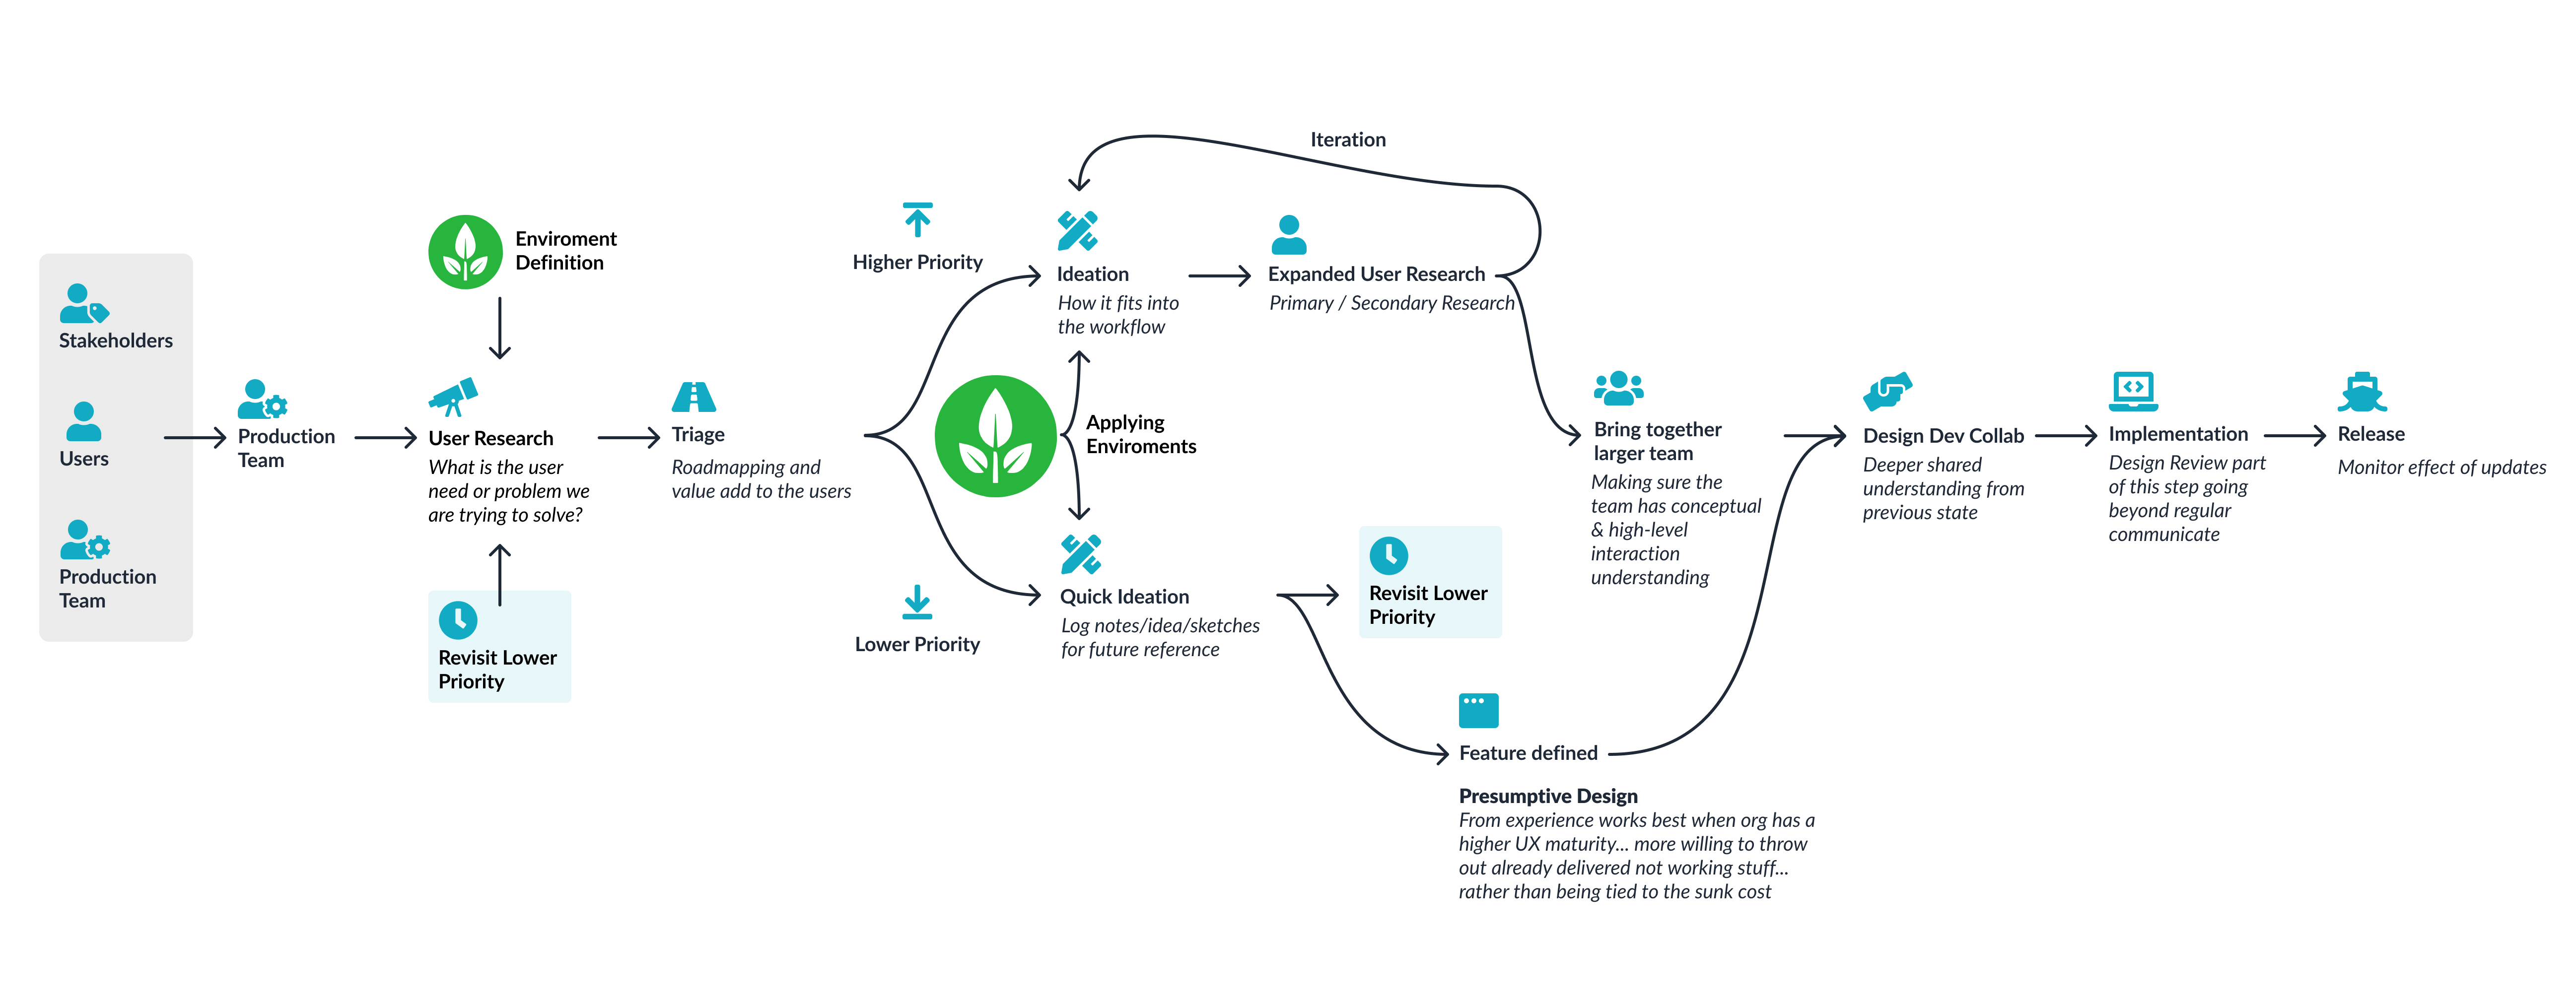 Design process workflow diagram with Environmental Conditions feature